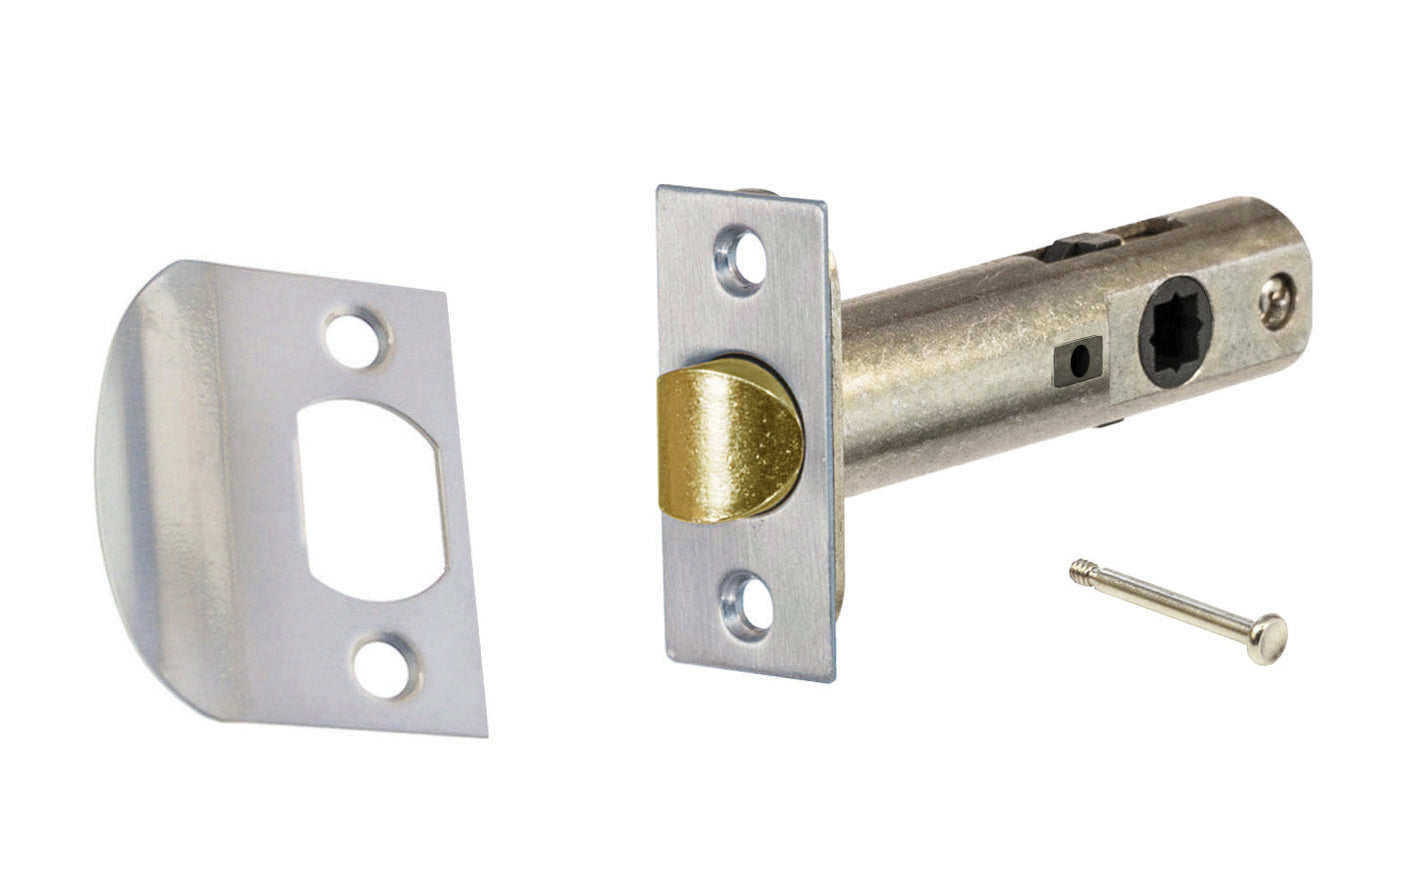 Classic Spring Latch for Doors (Privacy) with 2-3/4" Backset. Designed for traditional doorknobs with square spindle shaft. Steel casing & solid brass plates. For vintage antique door knobs, or reproduction door knobs. For locking doors. Brushed Nickel Finish.